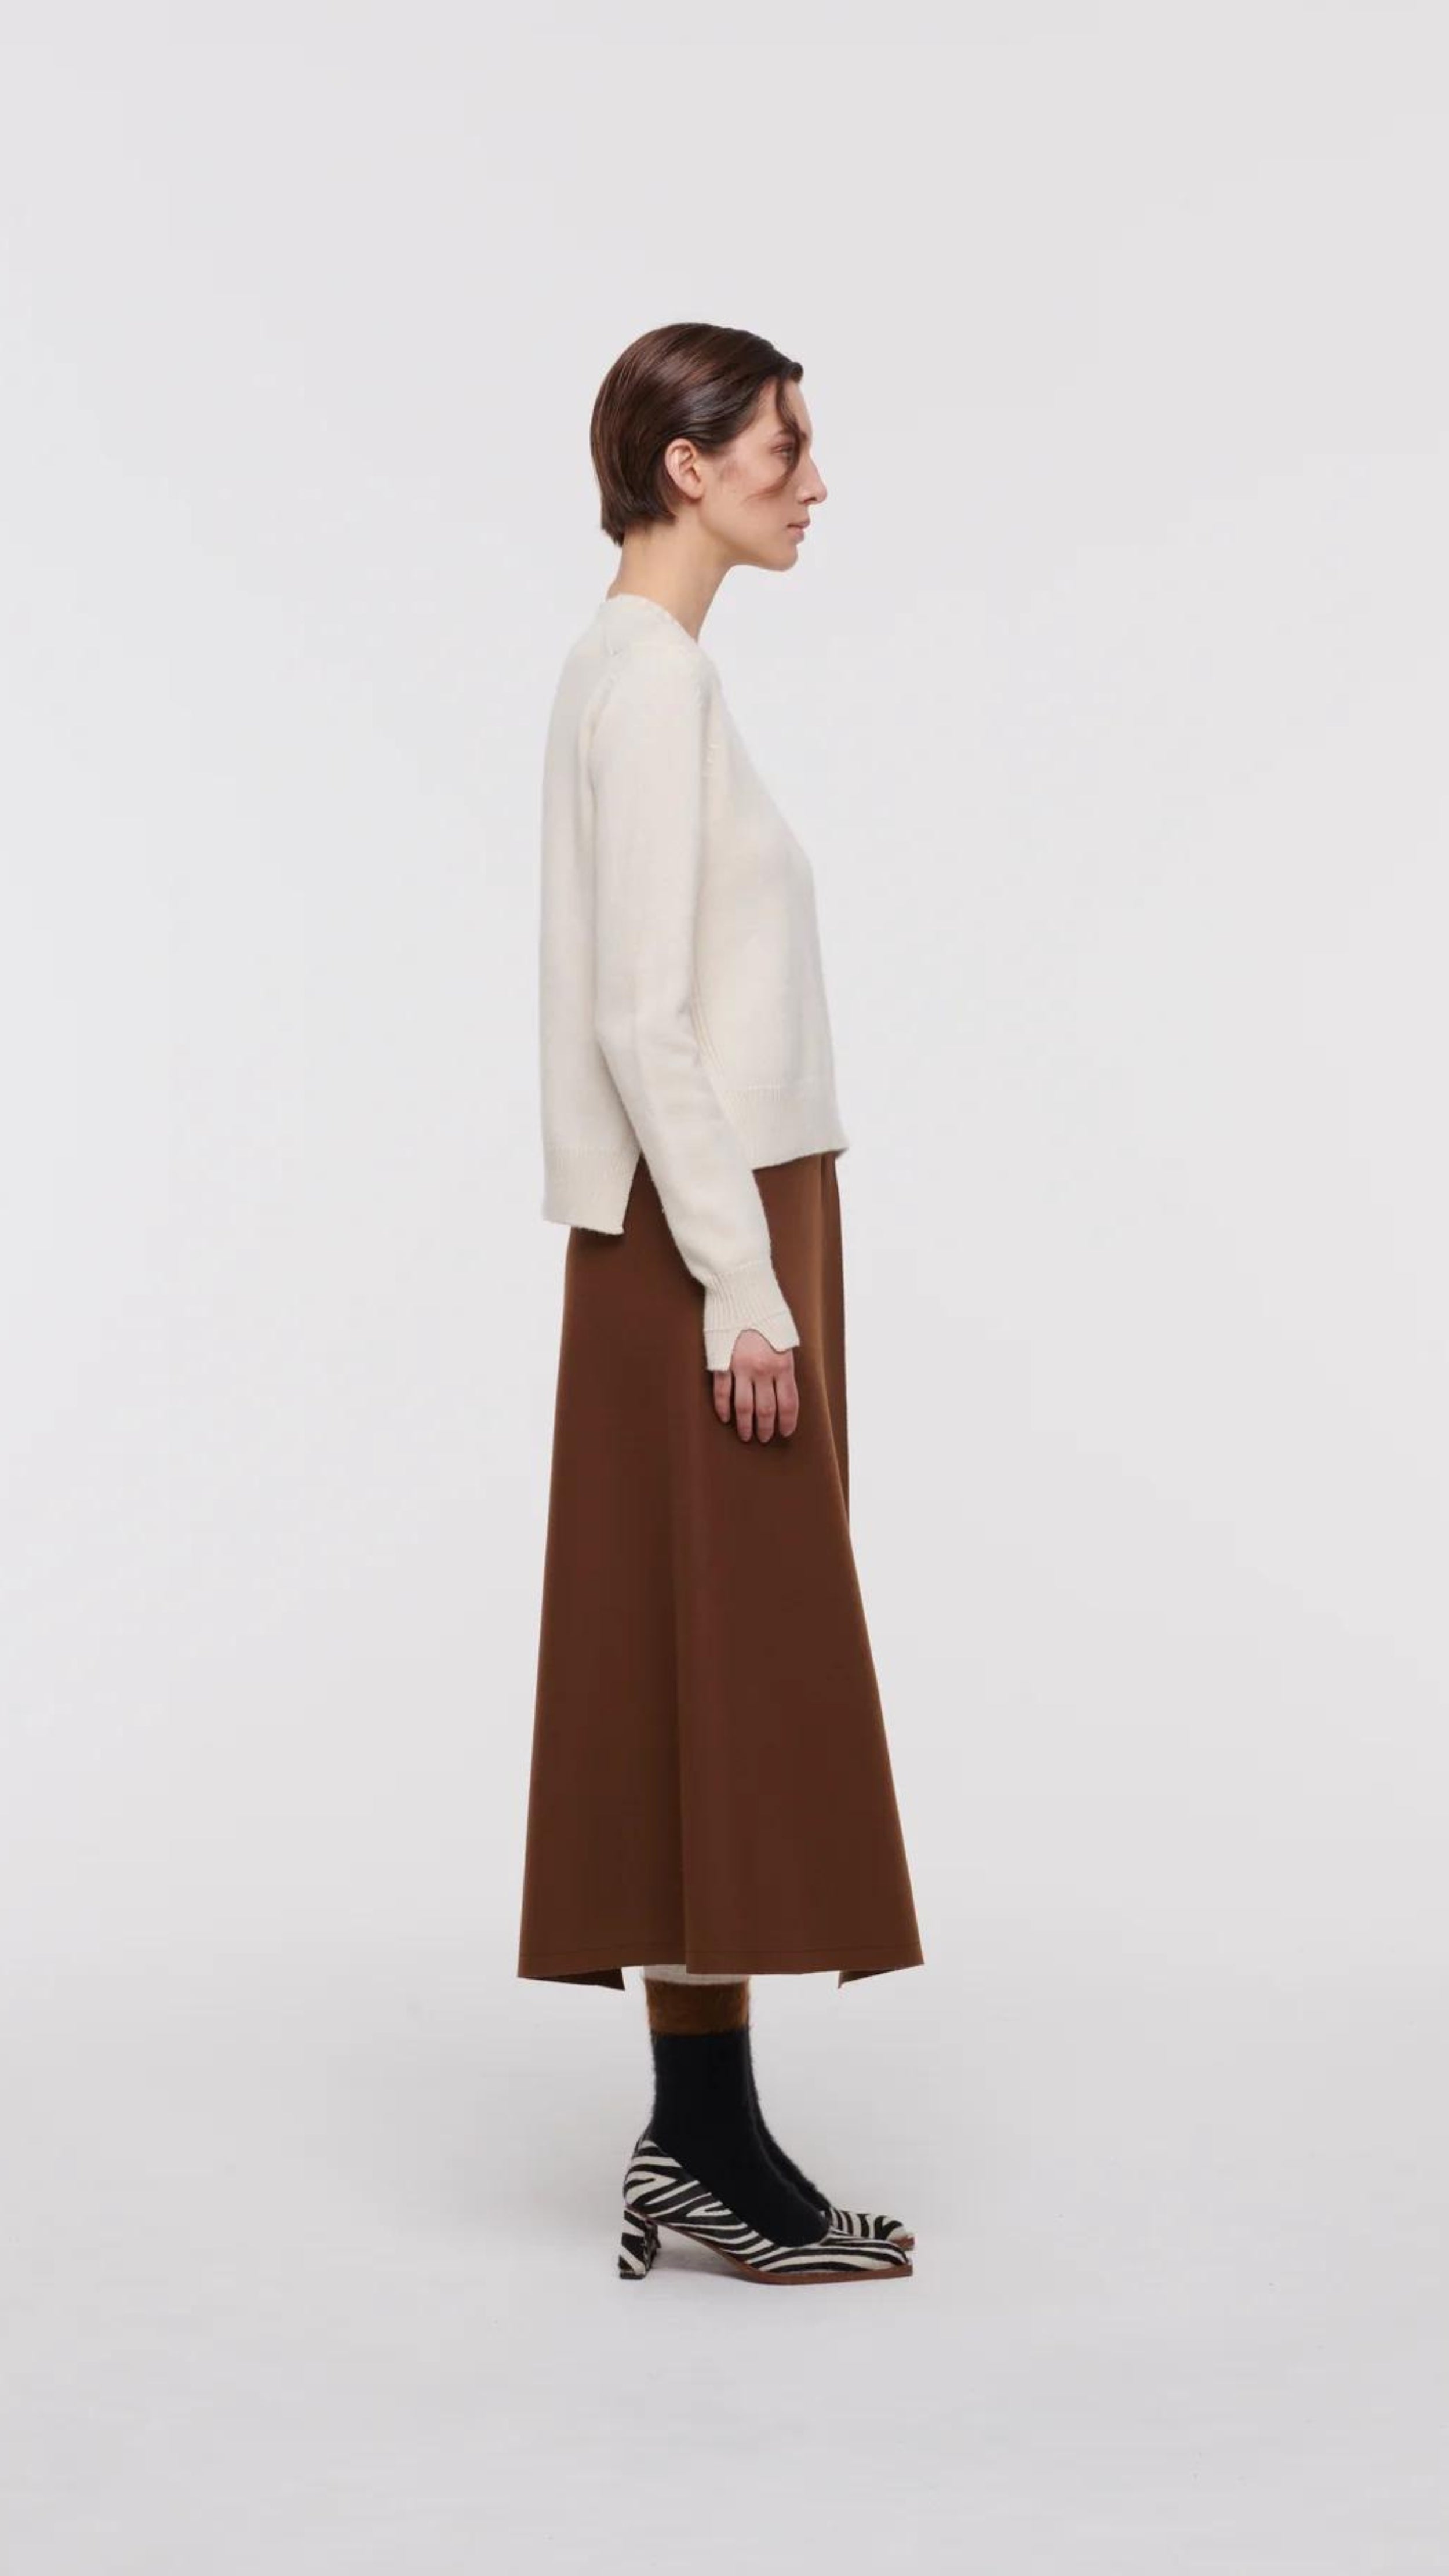 Plac C Contrast Midi Skirt. Paneled midi skirt in sofy brown chestnut wool and black satin. Modern and classic in shape and colors. Shown here on the model facing the side.